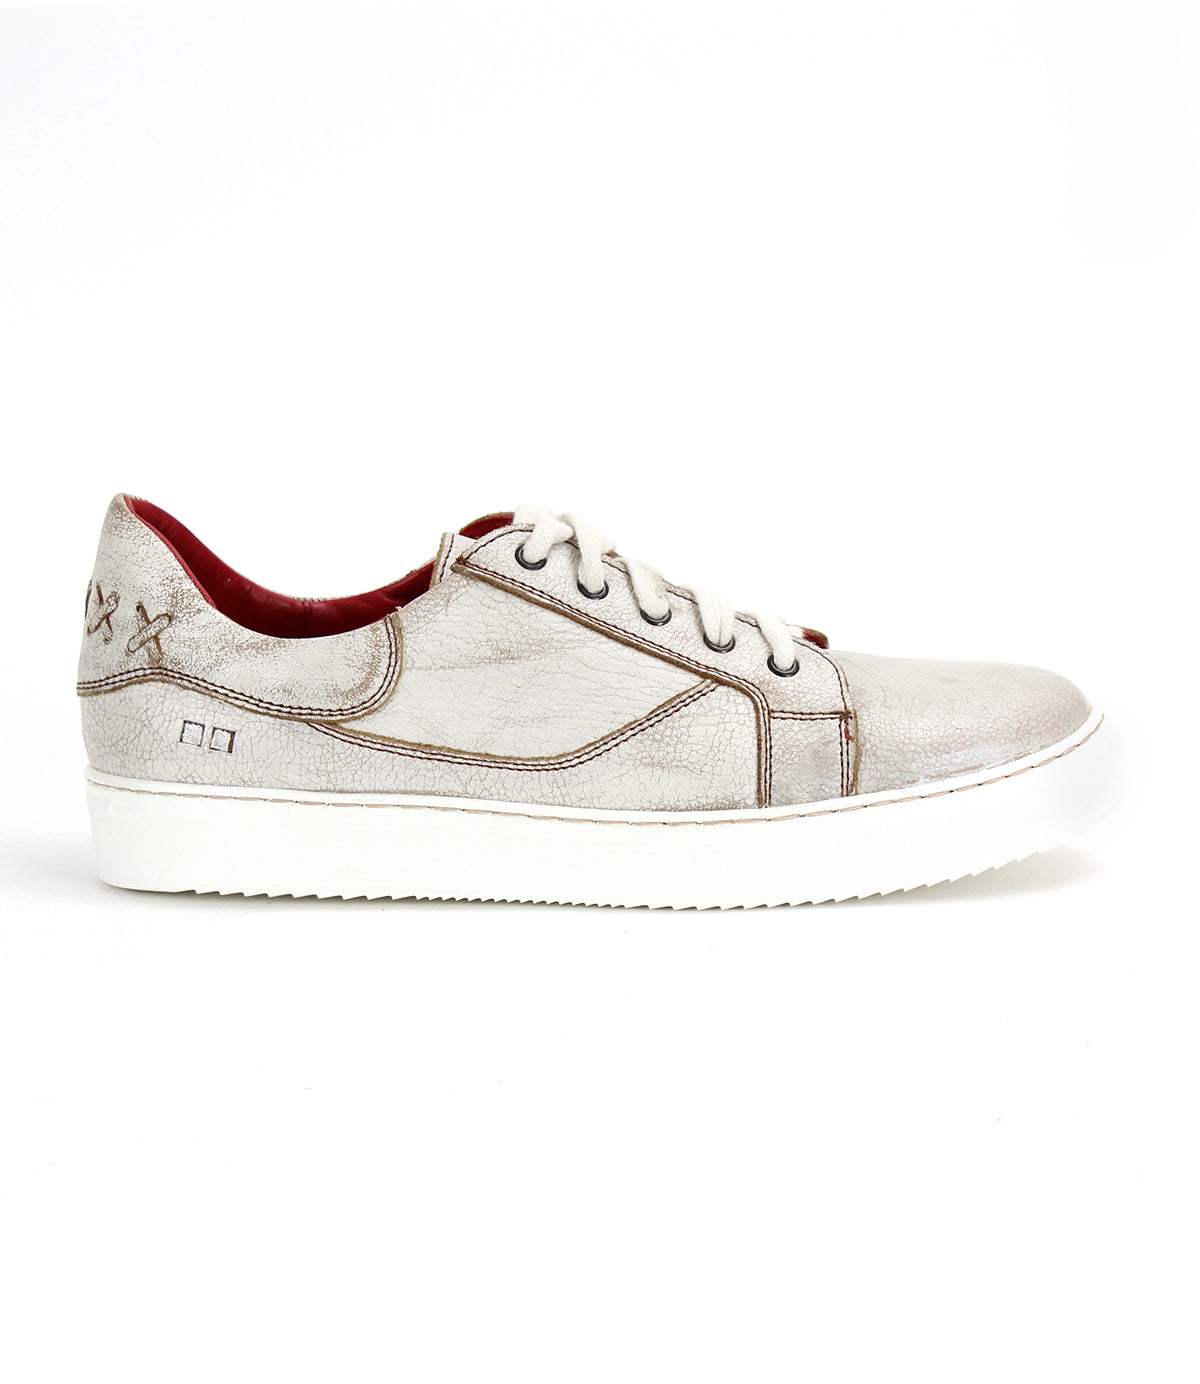 A stylish Azeli sneaker with a red sole from Bed Stu.